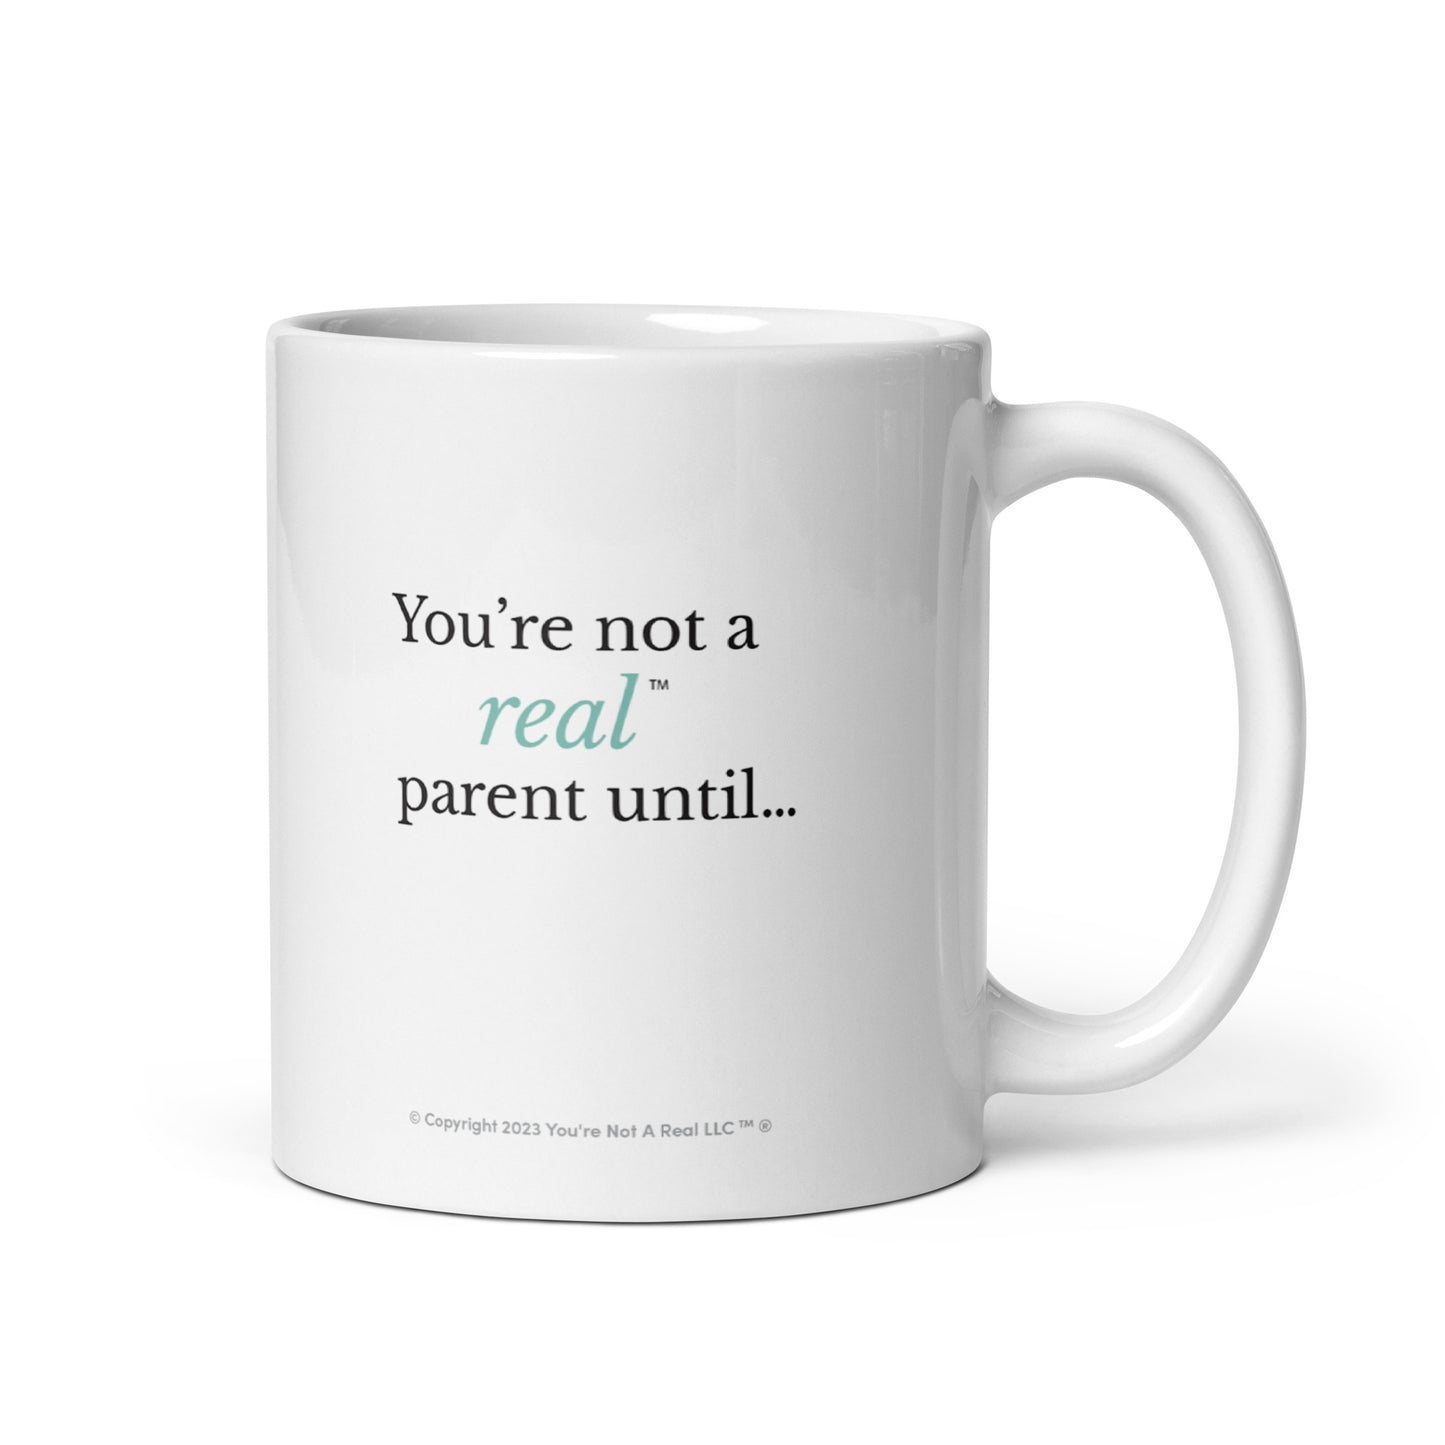 Mug: "It's just a phase" has become a mantra